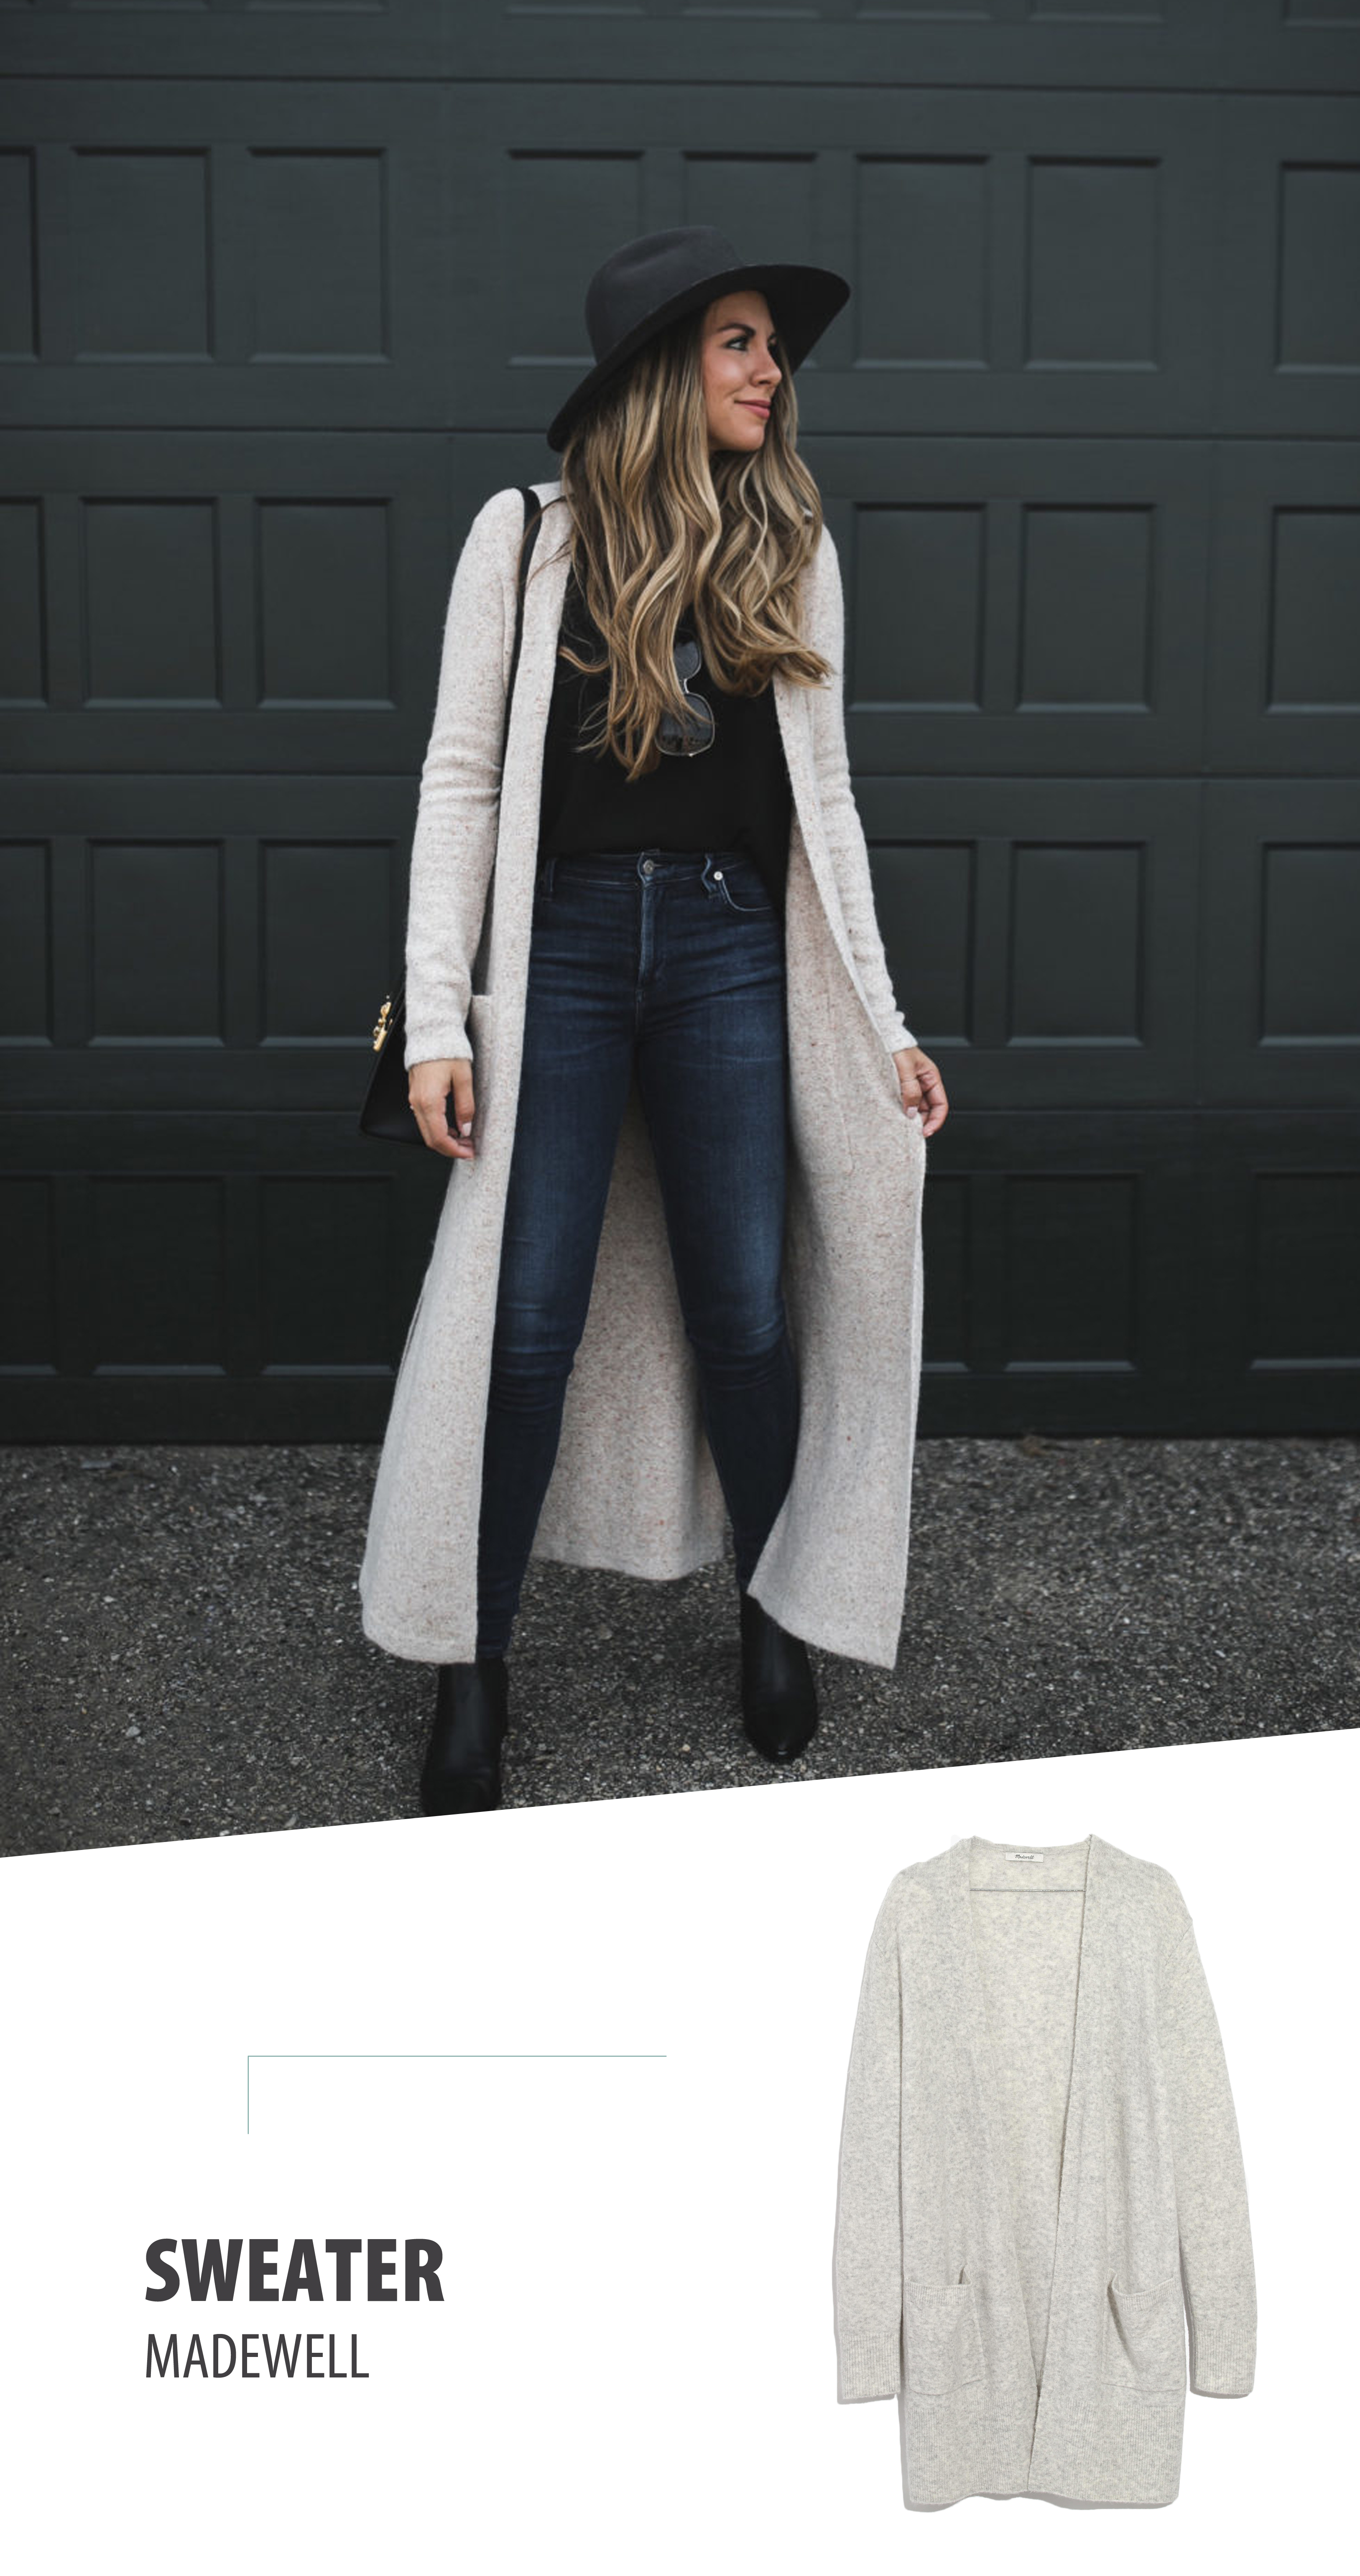 How to style extra long cardigans | Balance it.